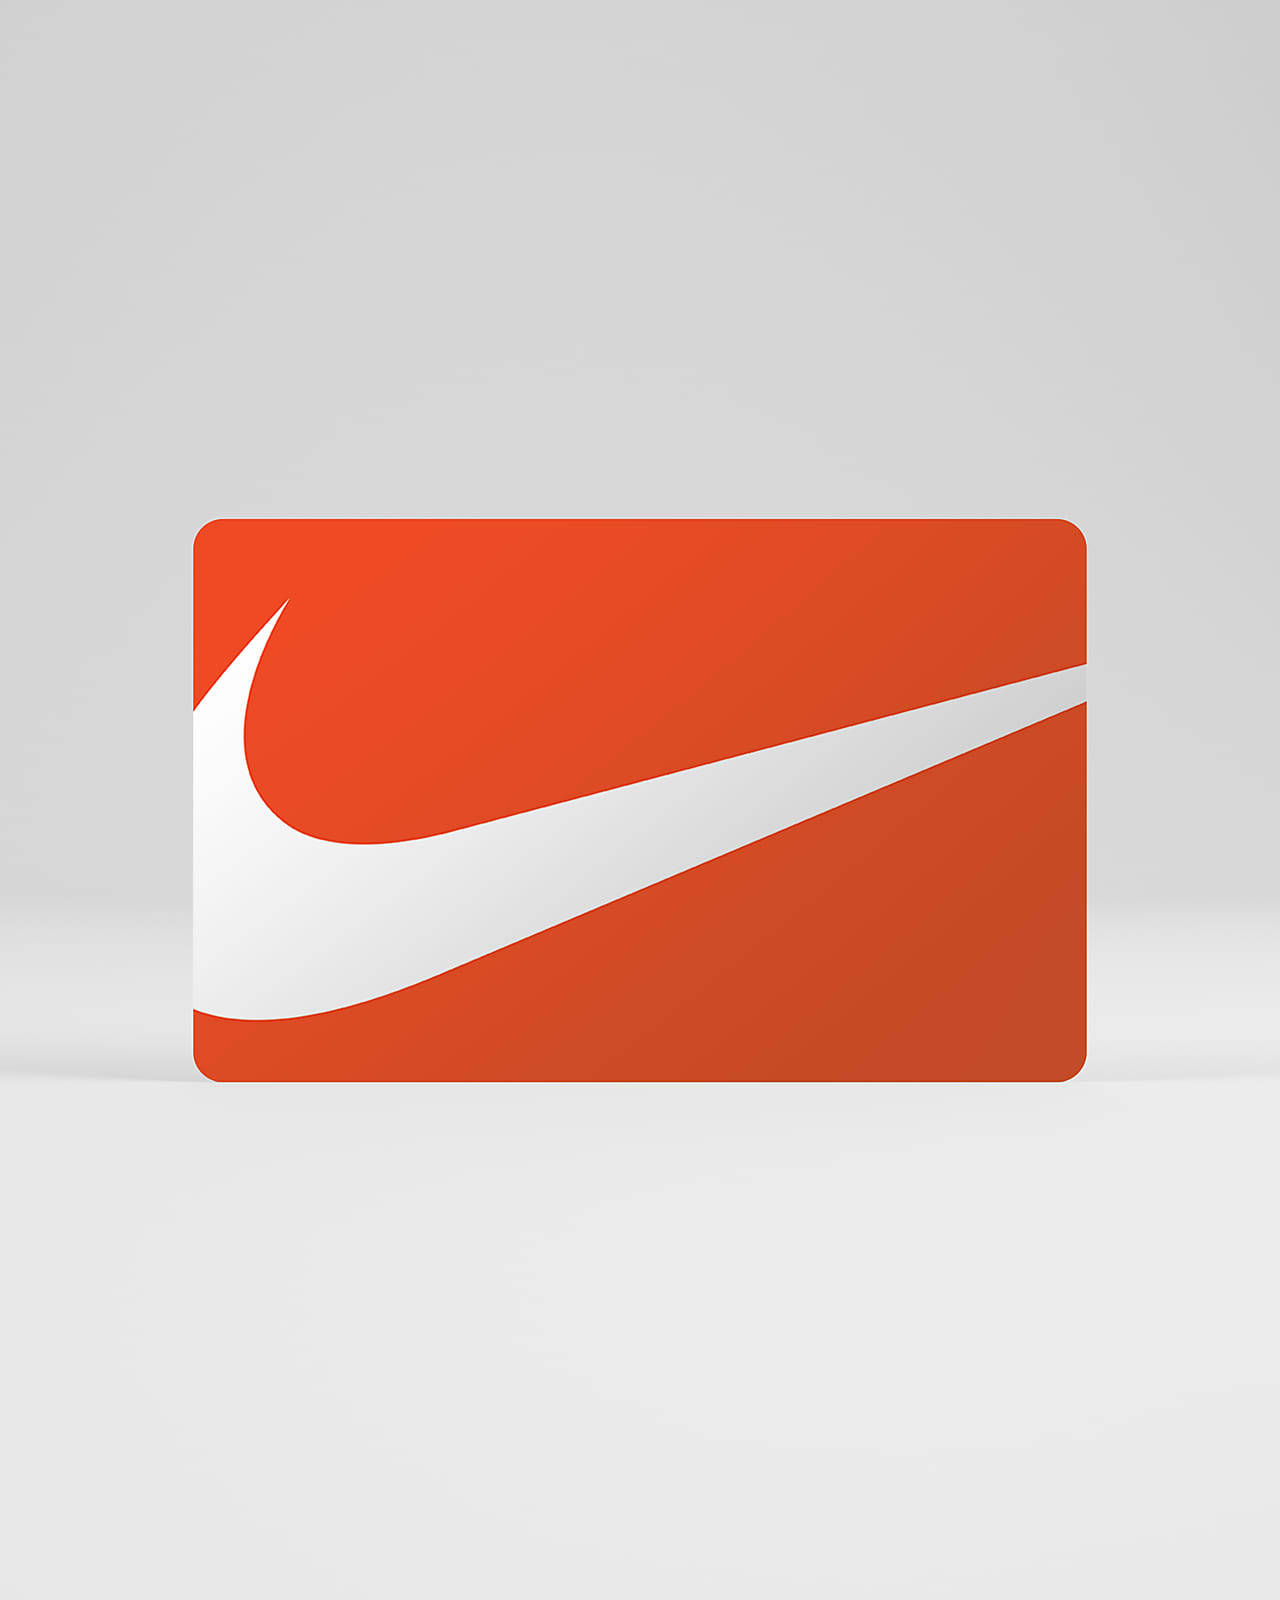 where can a nike gift card be used at